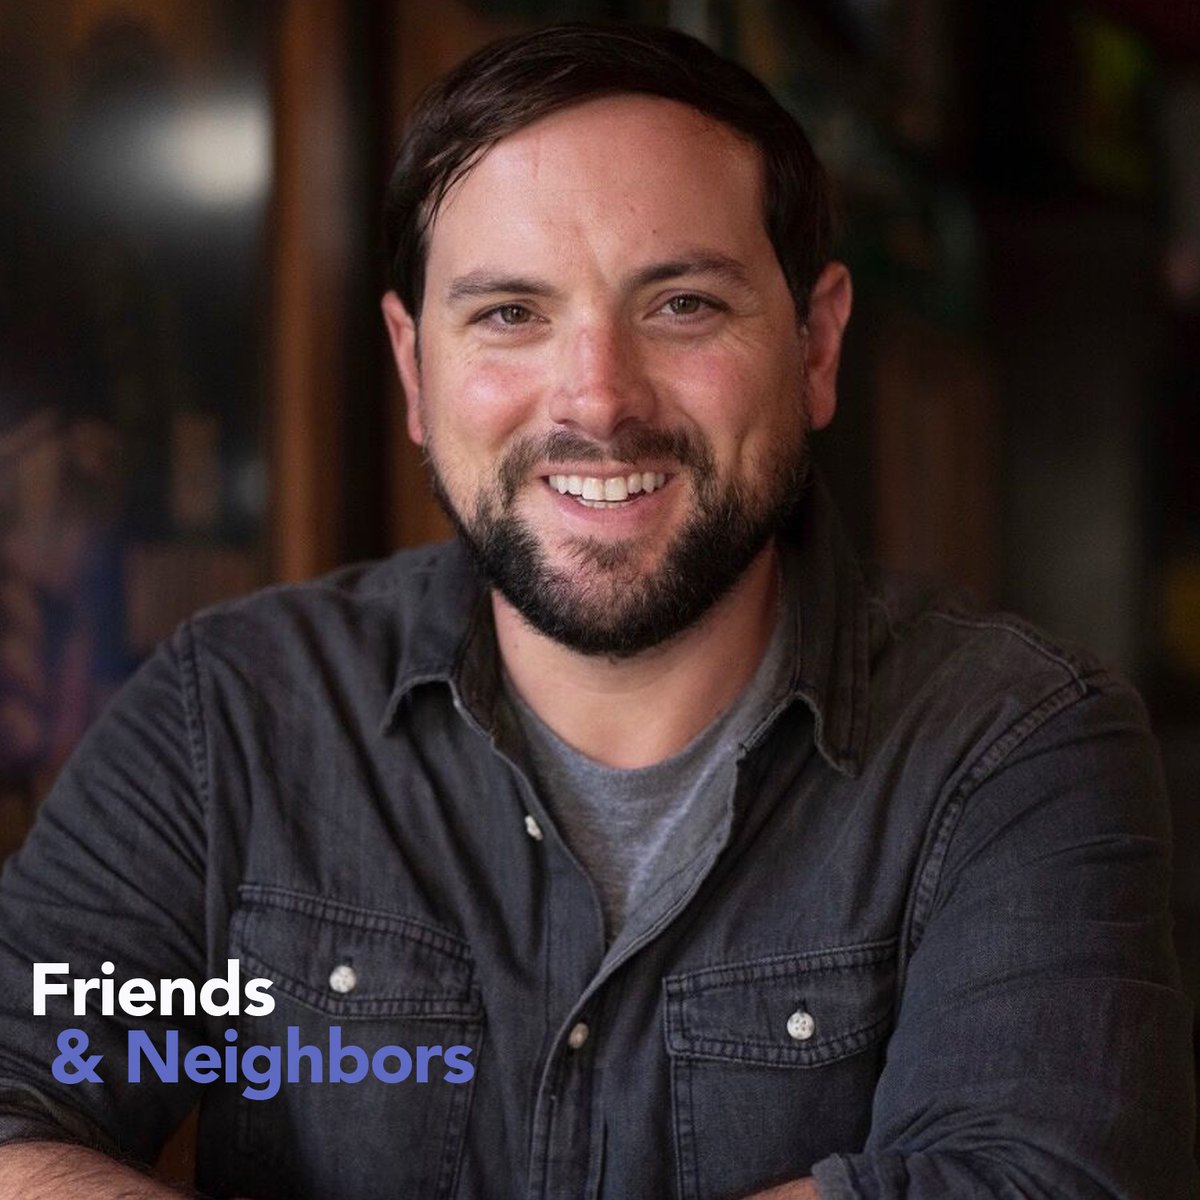 This week, @LukeRussert discusses his @NYT Best Seller, Look For Me There, and what he learned on his 3-year, 6-continent odyssey to grieve his father and find himself.

Listen to Friends & Neighbors on Apple (apple.co/3LNpe0C) & Spotify (bit.ly/3TEsduX) today.